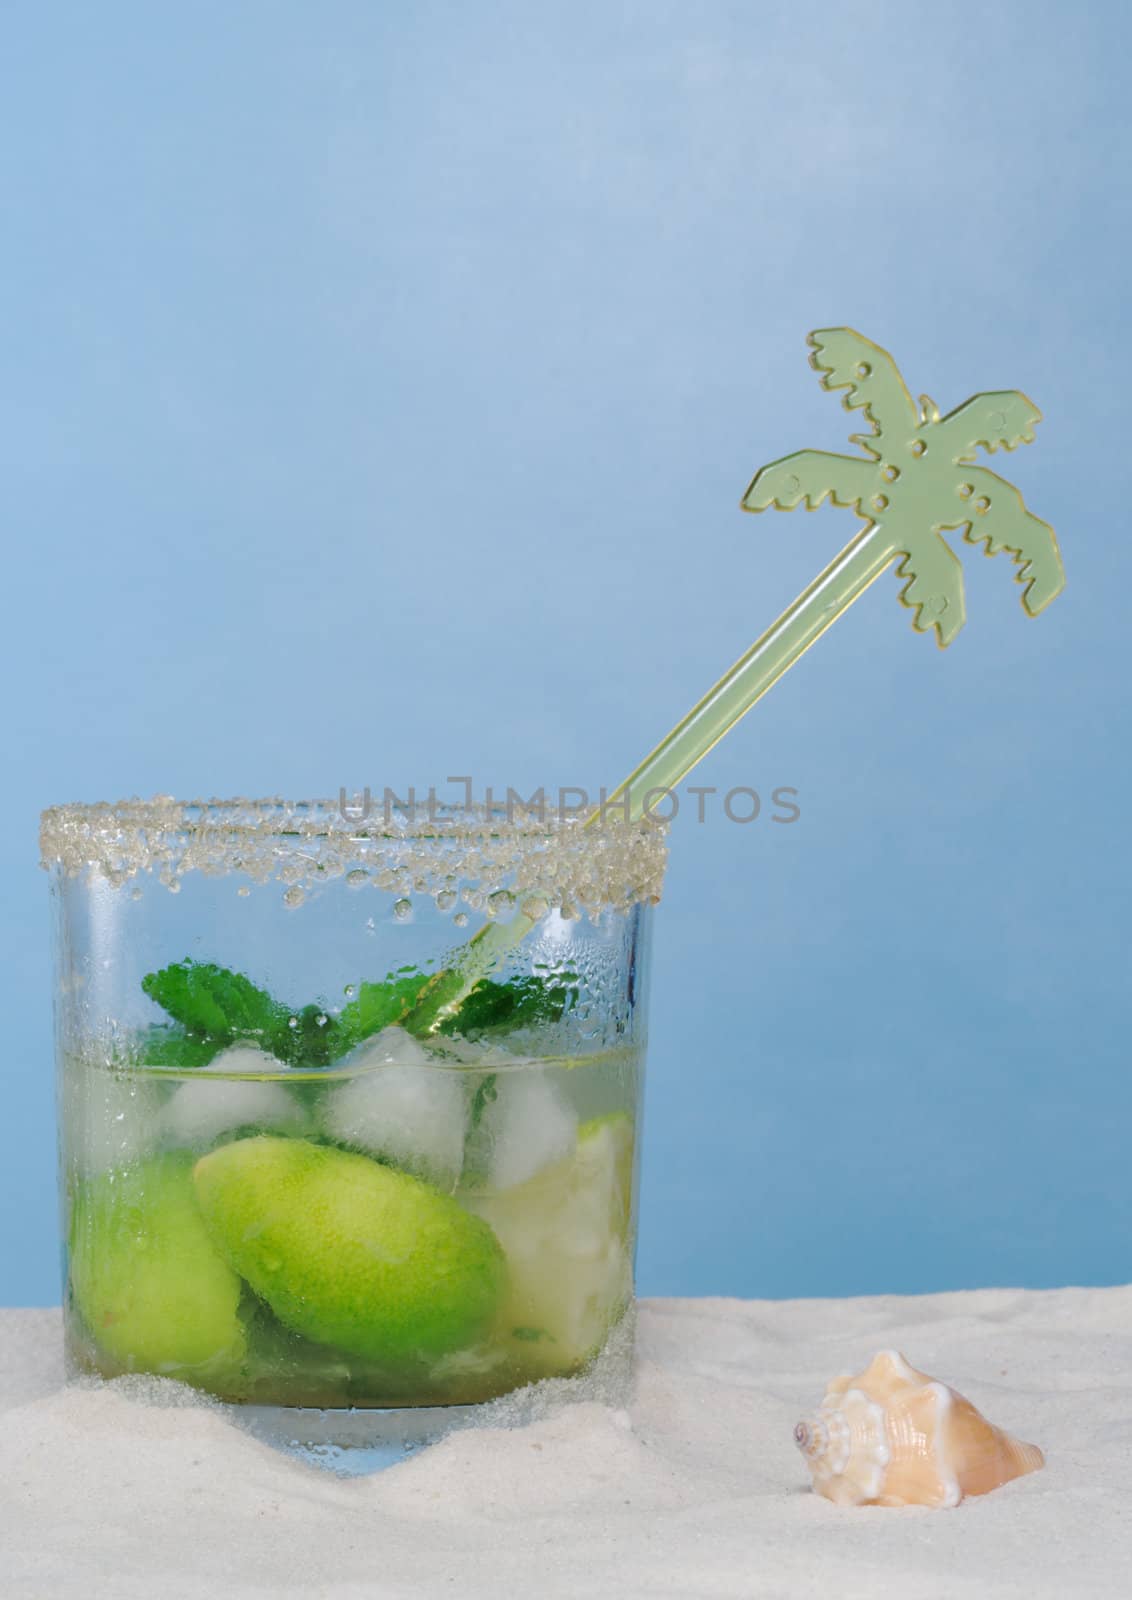 The Cocktail Mojito with Ice Cubes, Mint Leaves and Sugar Rim on Sand, with a palmtree stirring straw